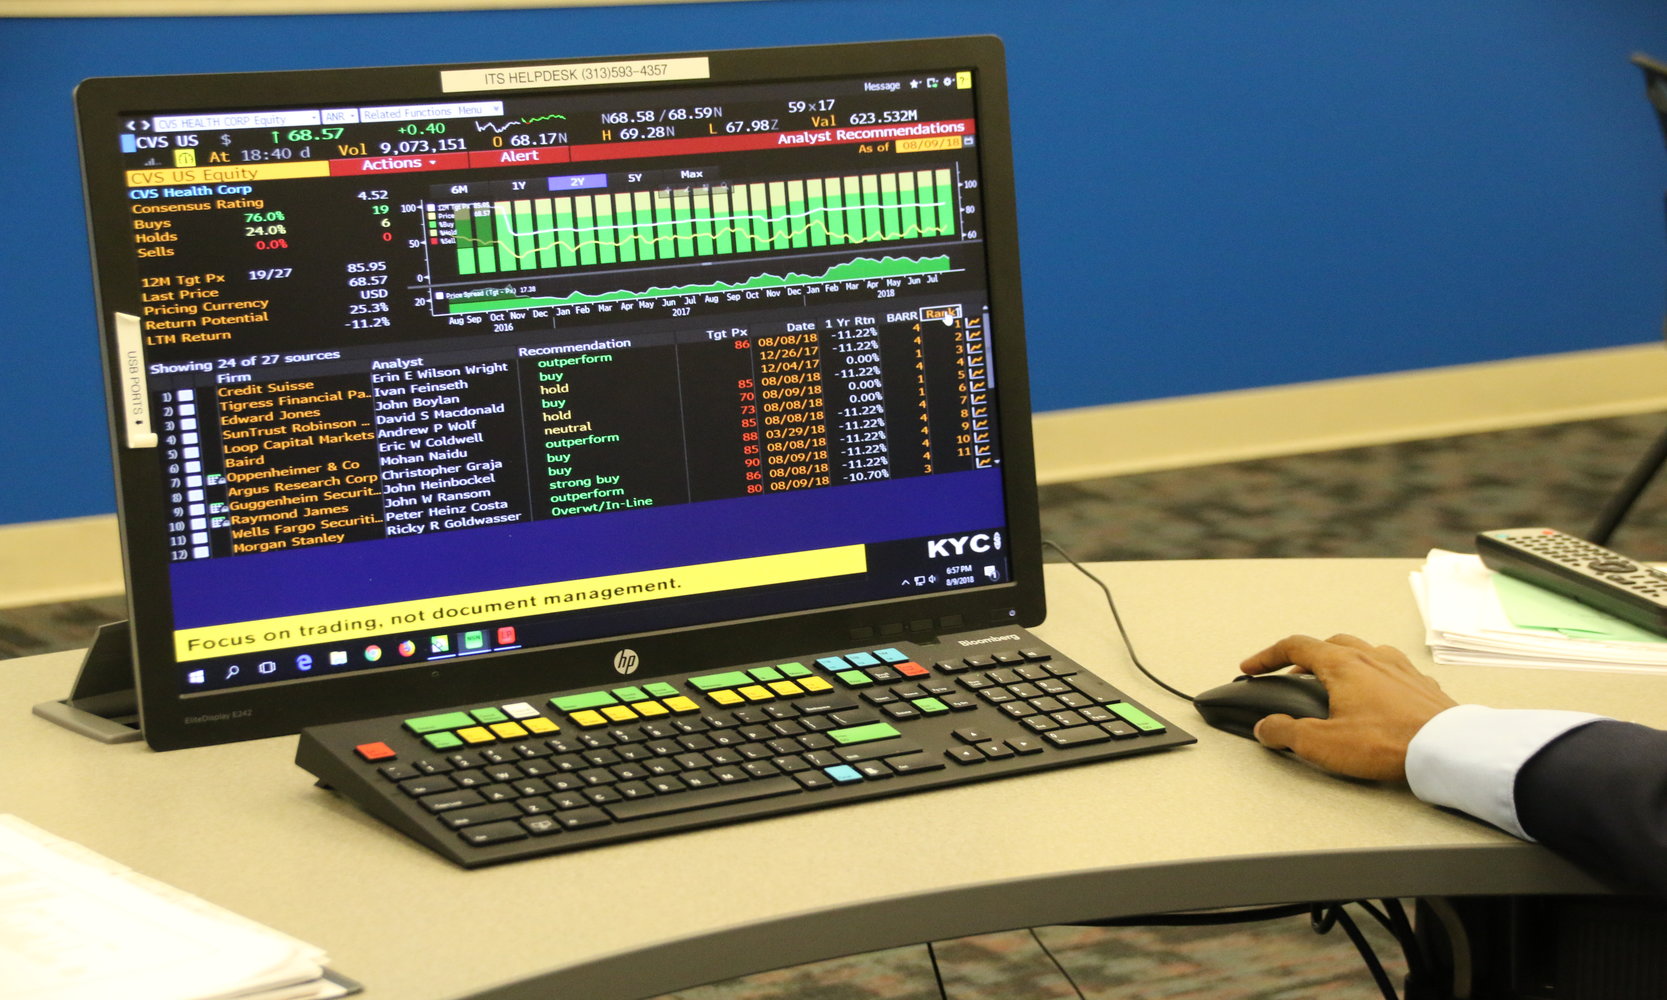 The Bloomberg Finance Lab has 12 Bloomberg Terminals for students to get hands on experience with the financial industry's equipment.